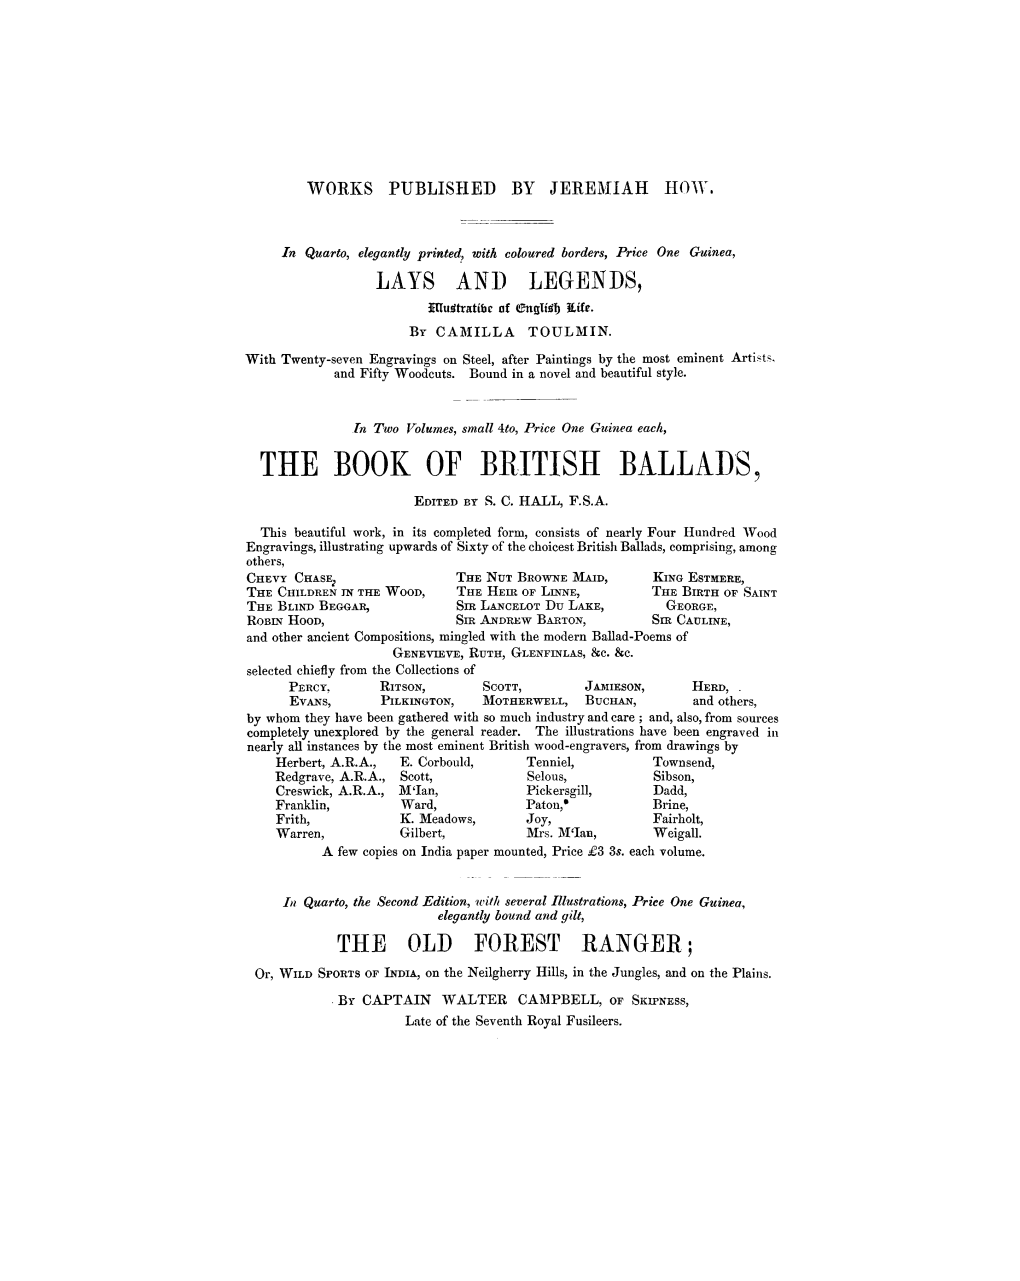 The Book of British Ballads, Edited by R